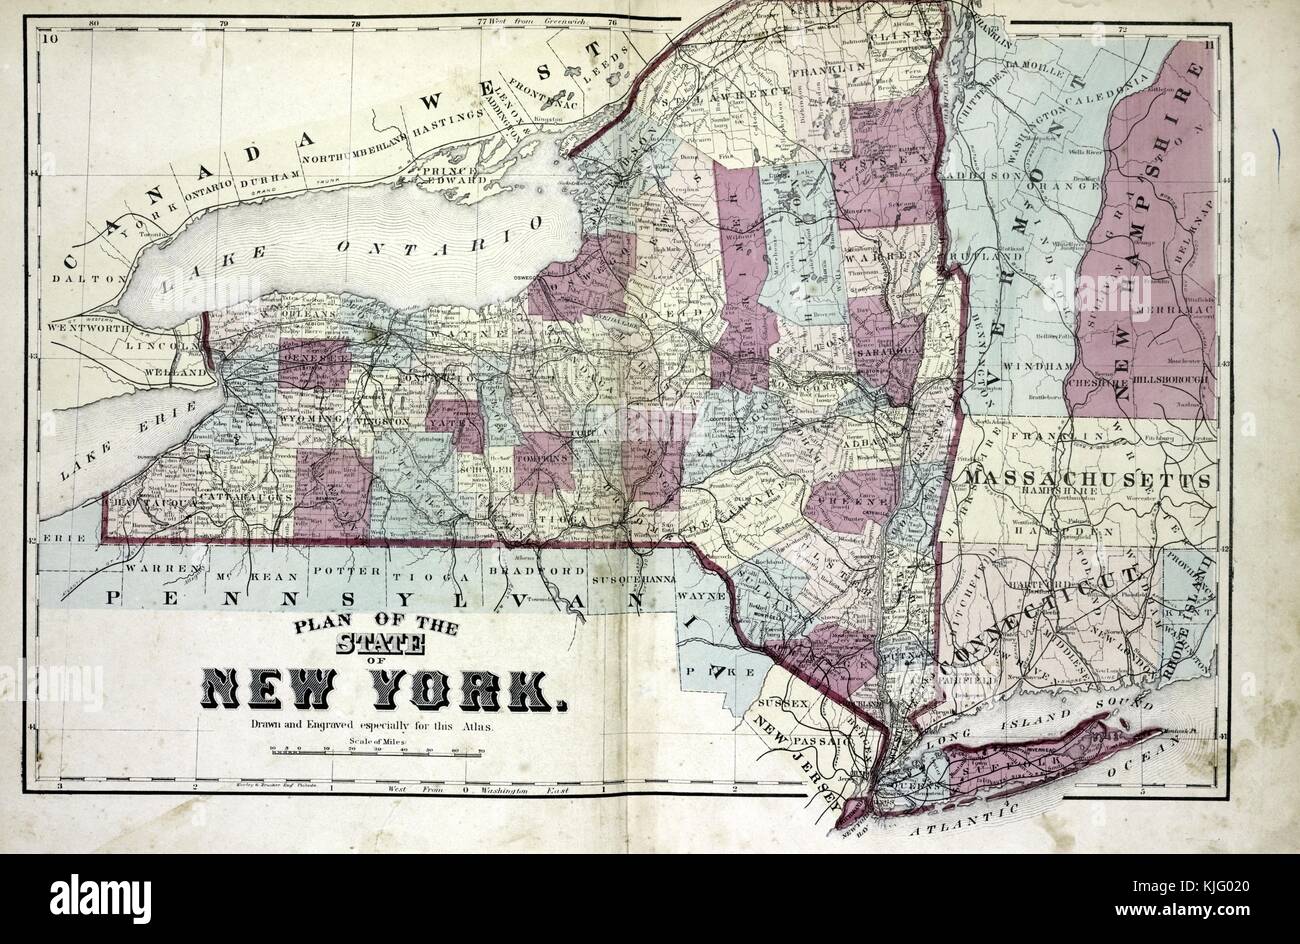 Engraved map image from an atlas, with original caption reading 'Plan of The State of New York', New York, 1873. From the New York Public Library. Stock Photo